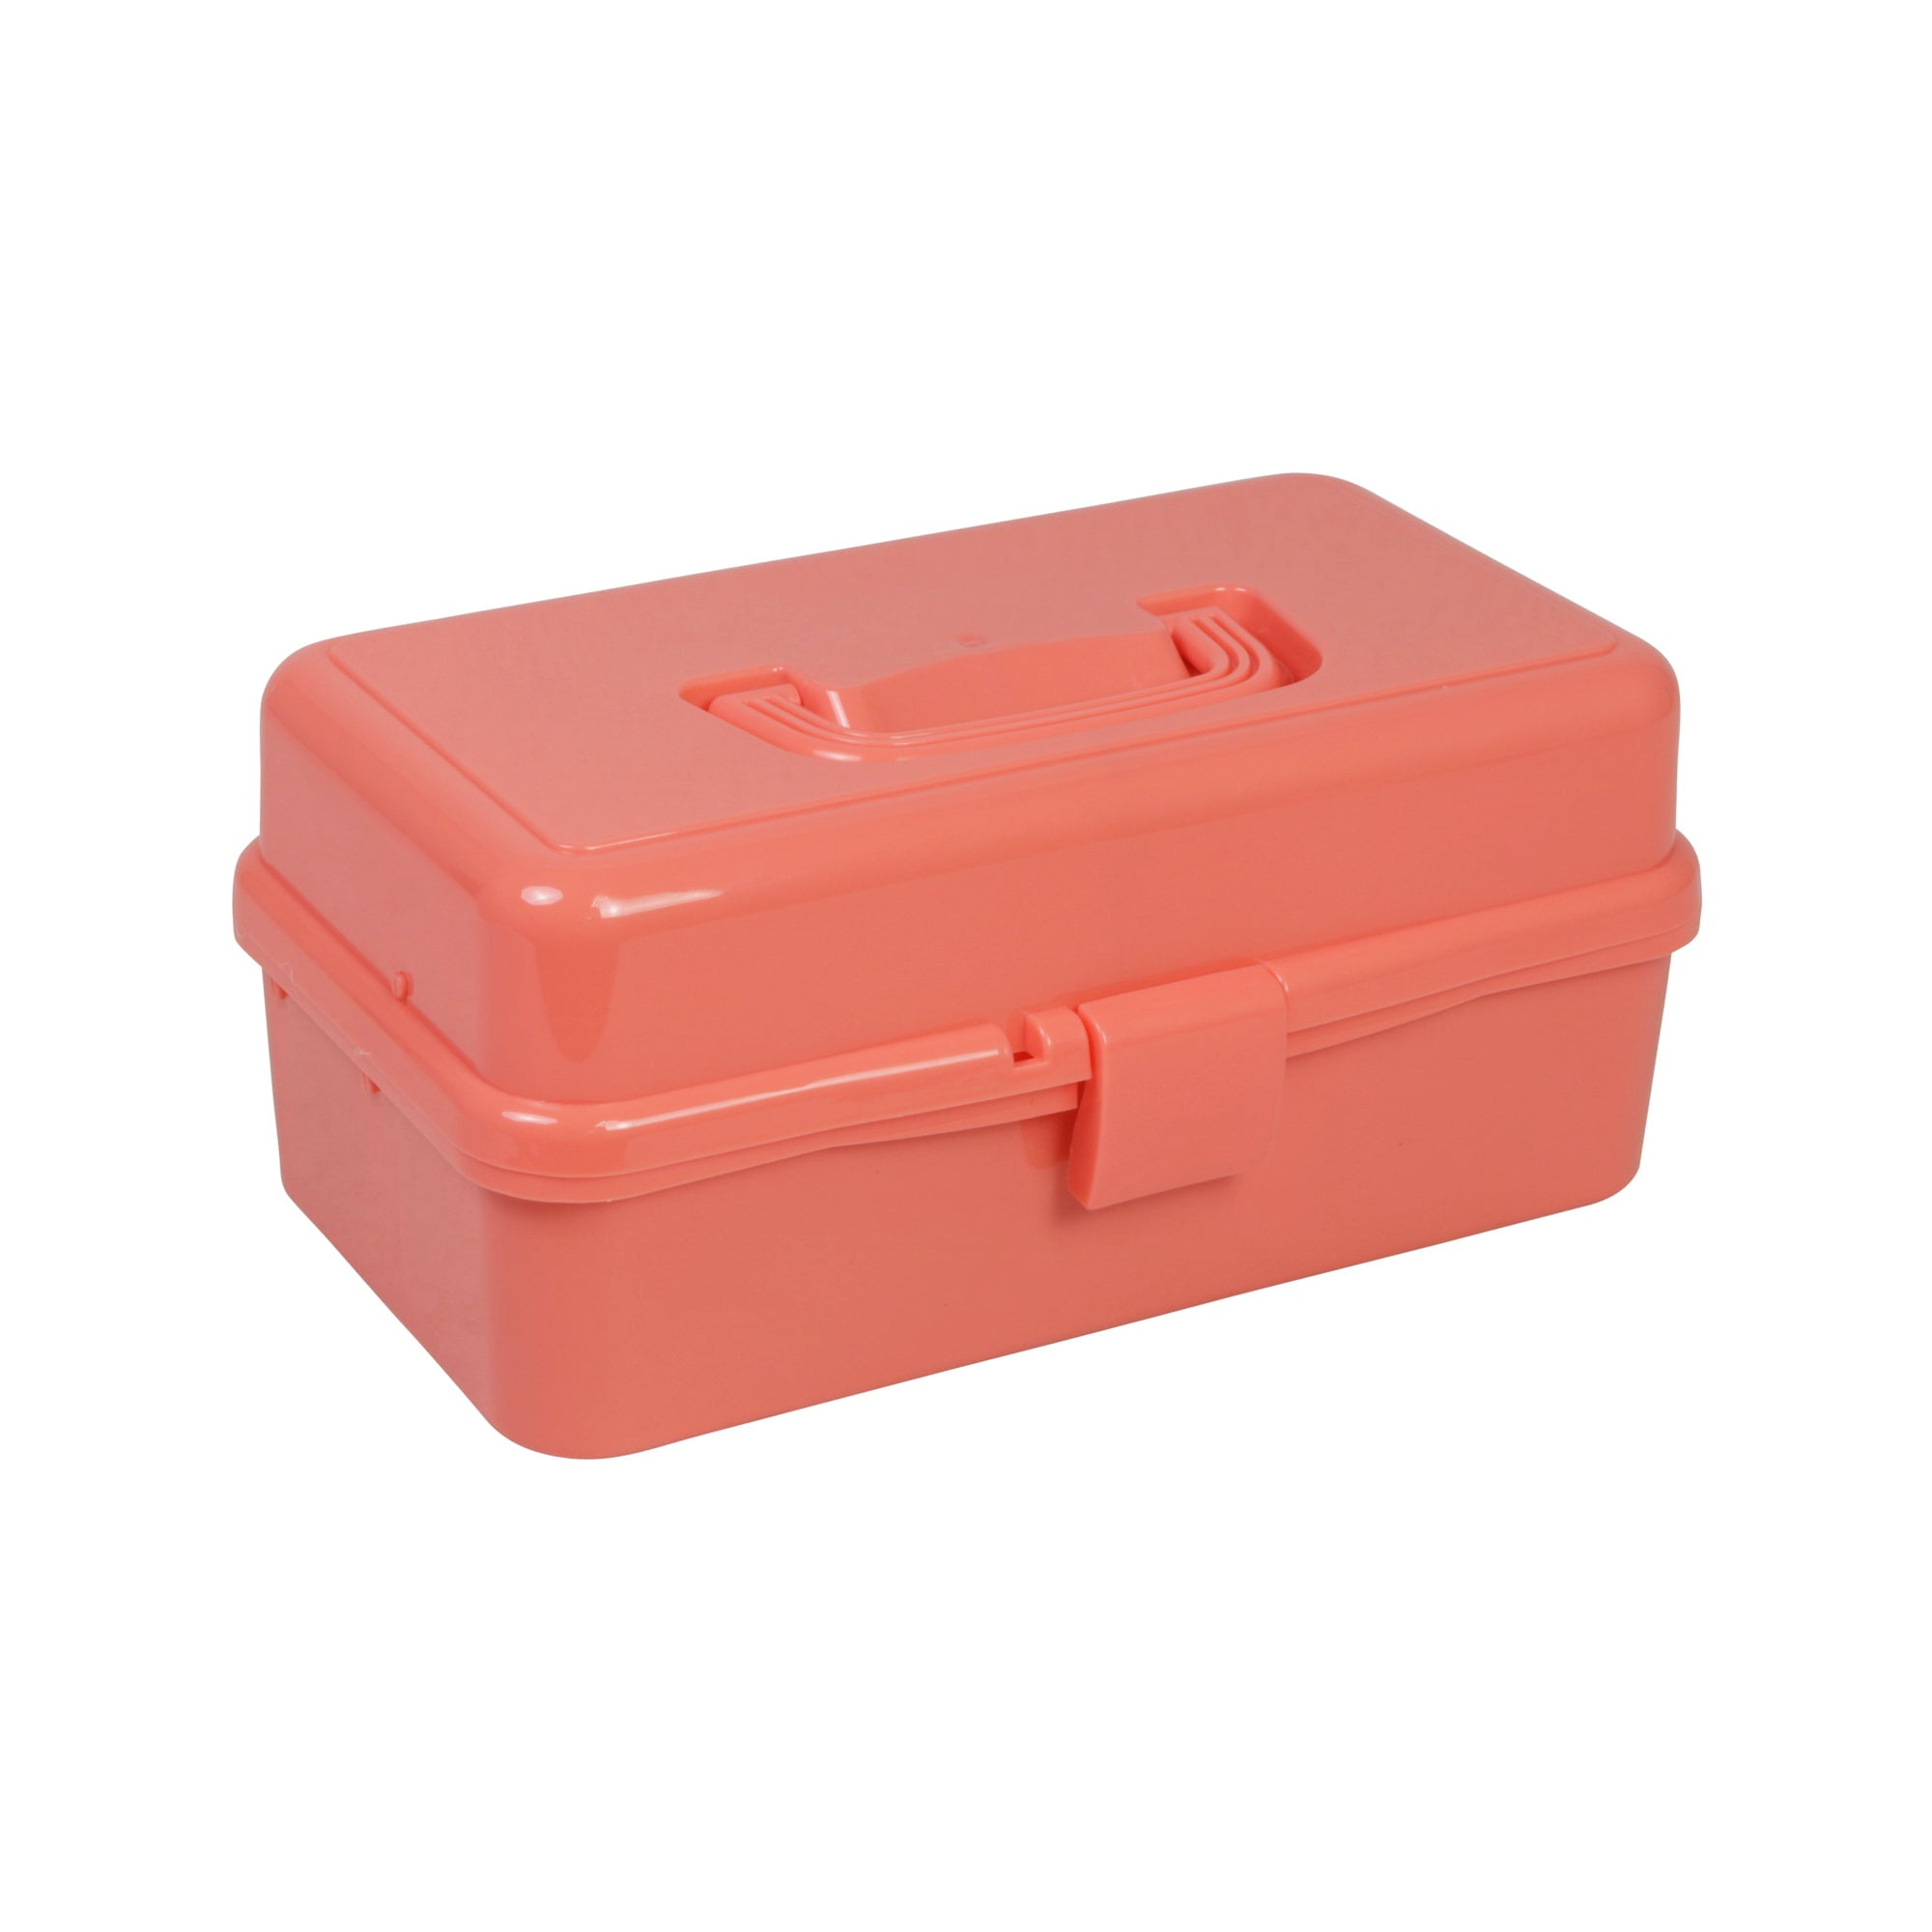 Everything Mary 3-Layer Storage Box, Coral - Foldable & Portable Tool Box for Art & Craft Supply